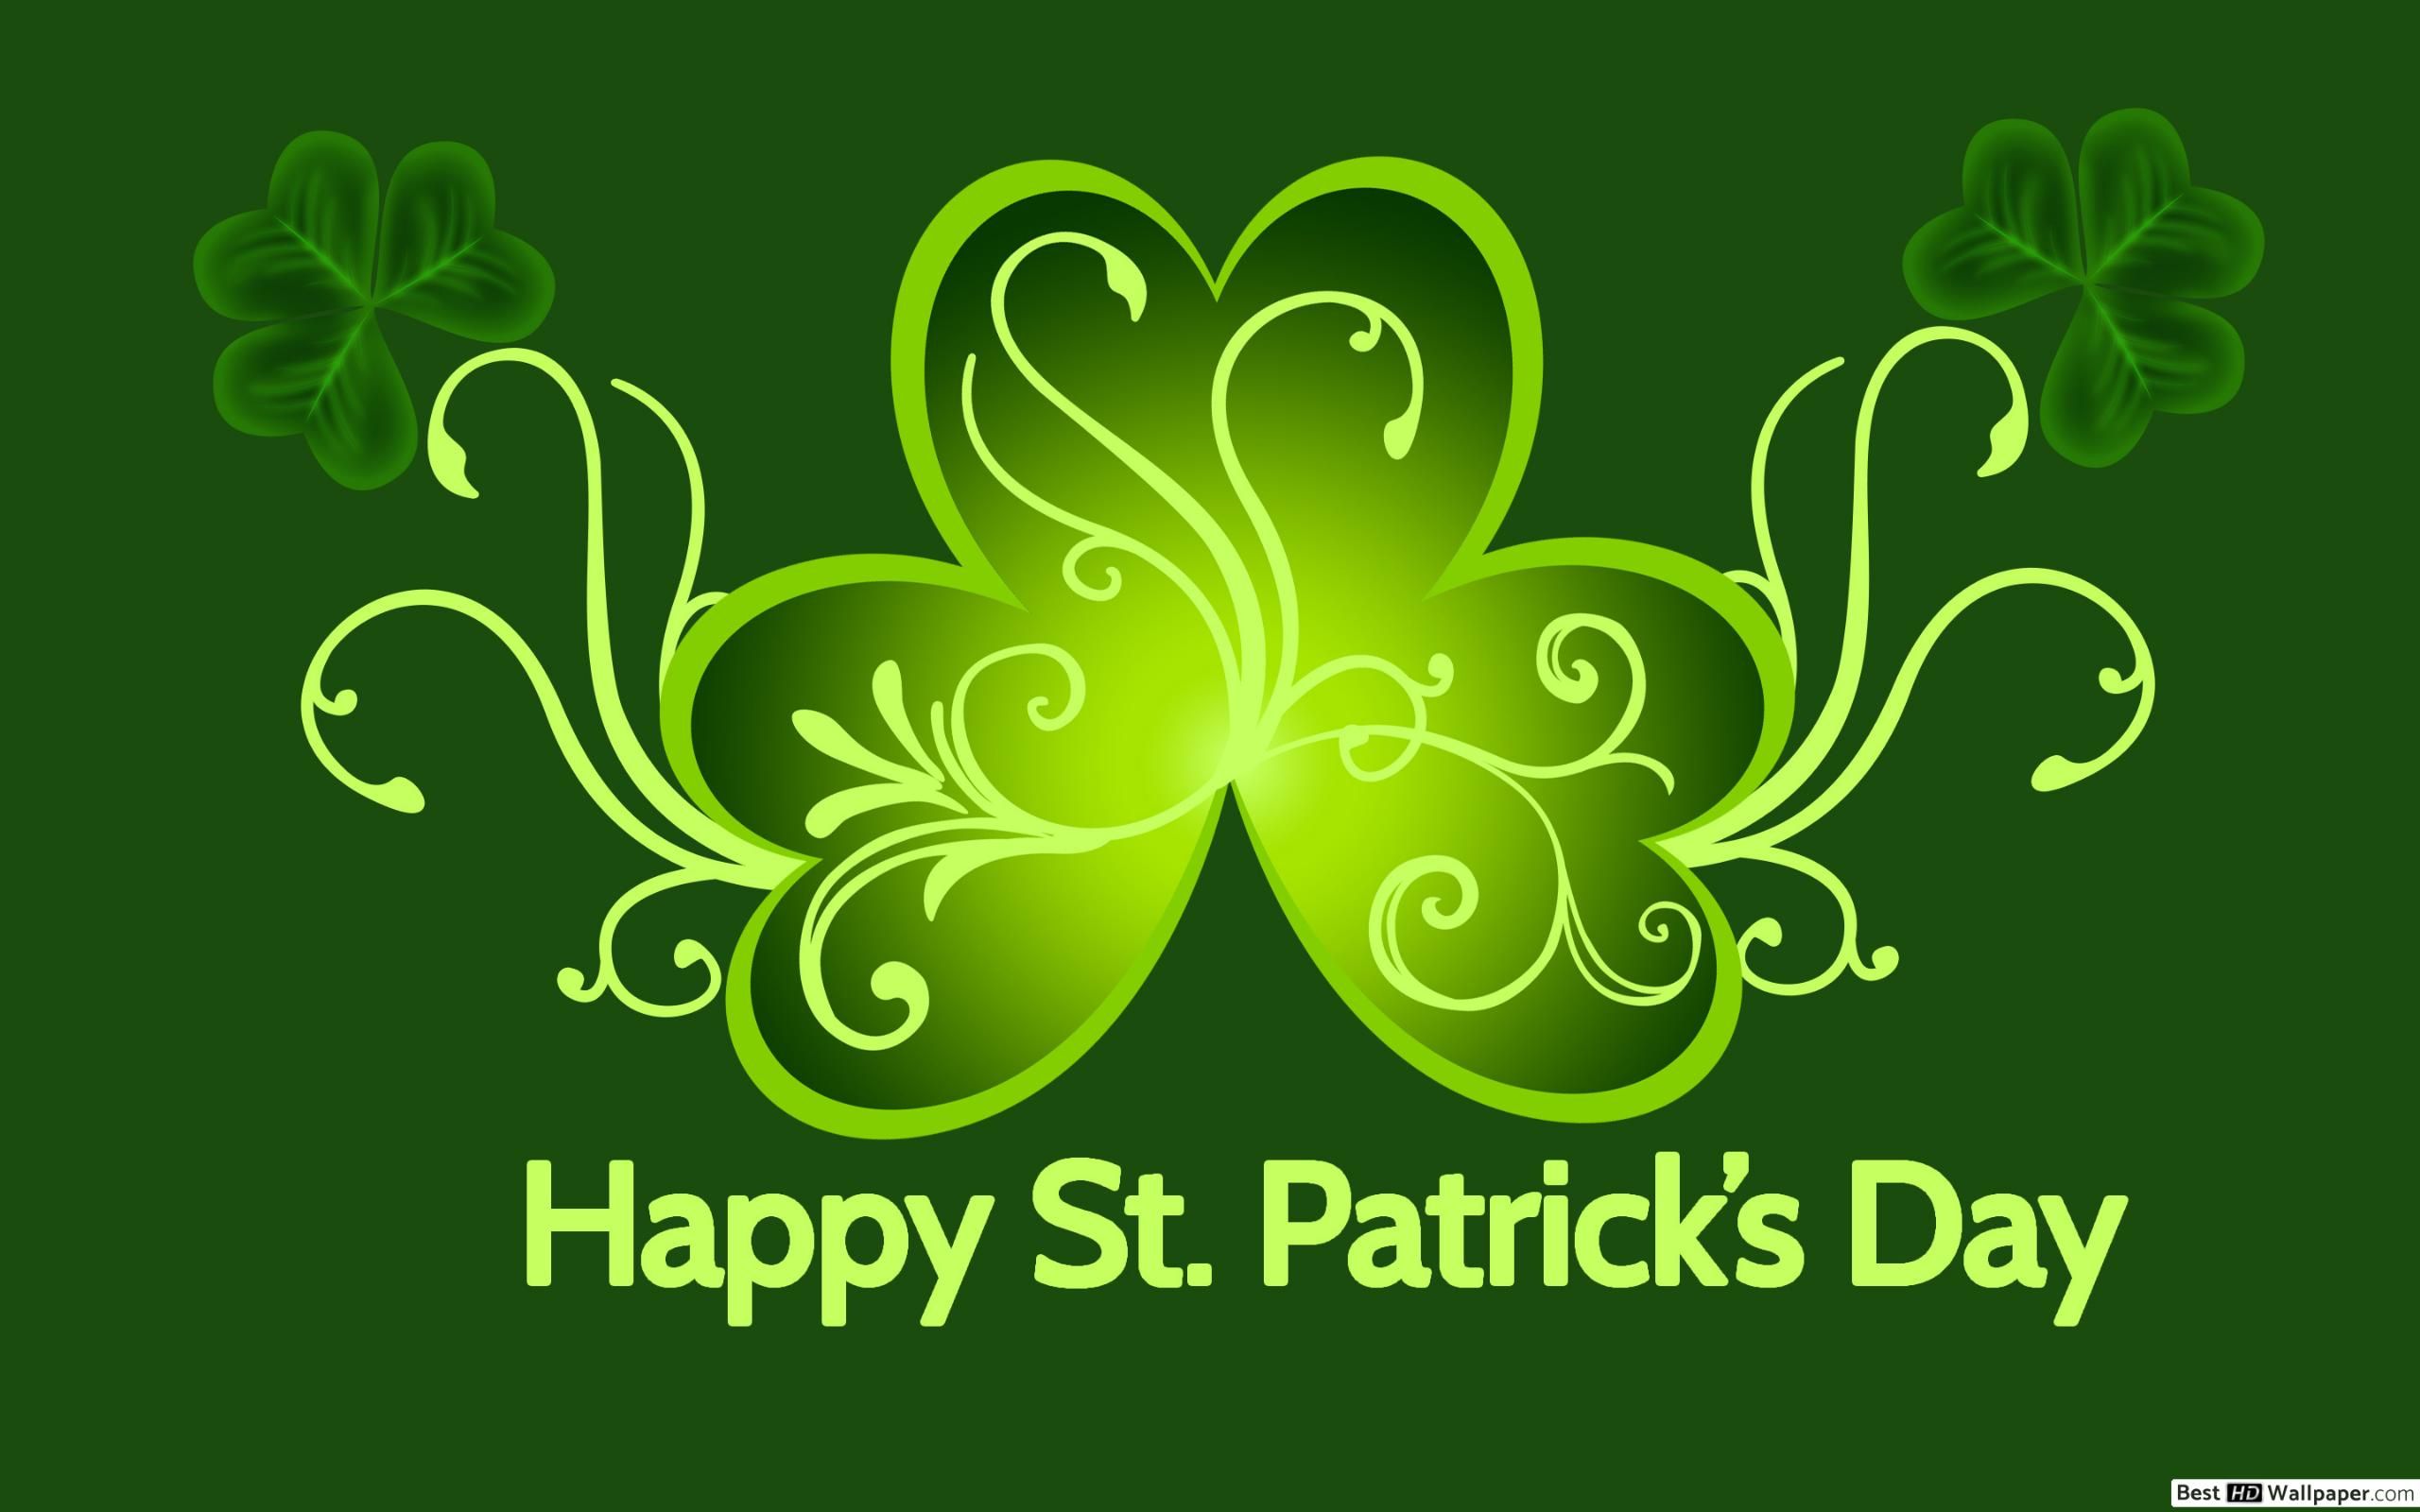 Happy St. Patrick's Day HD wallpaper download